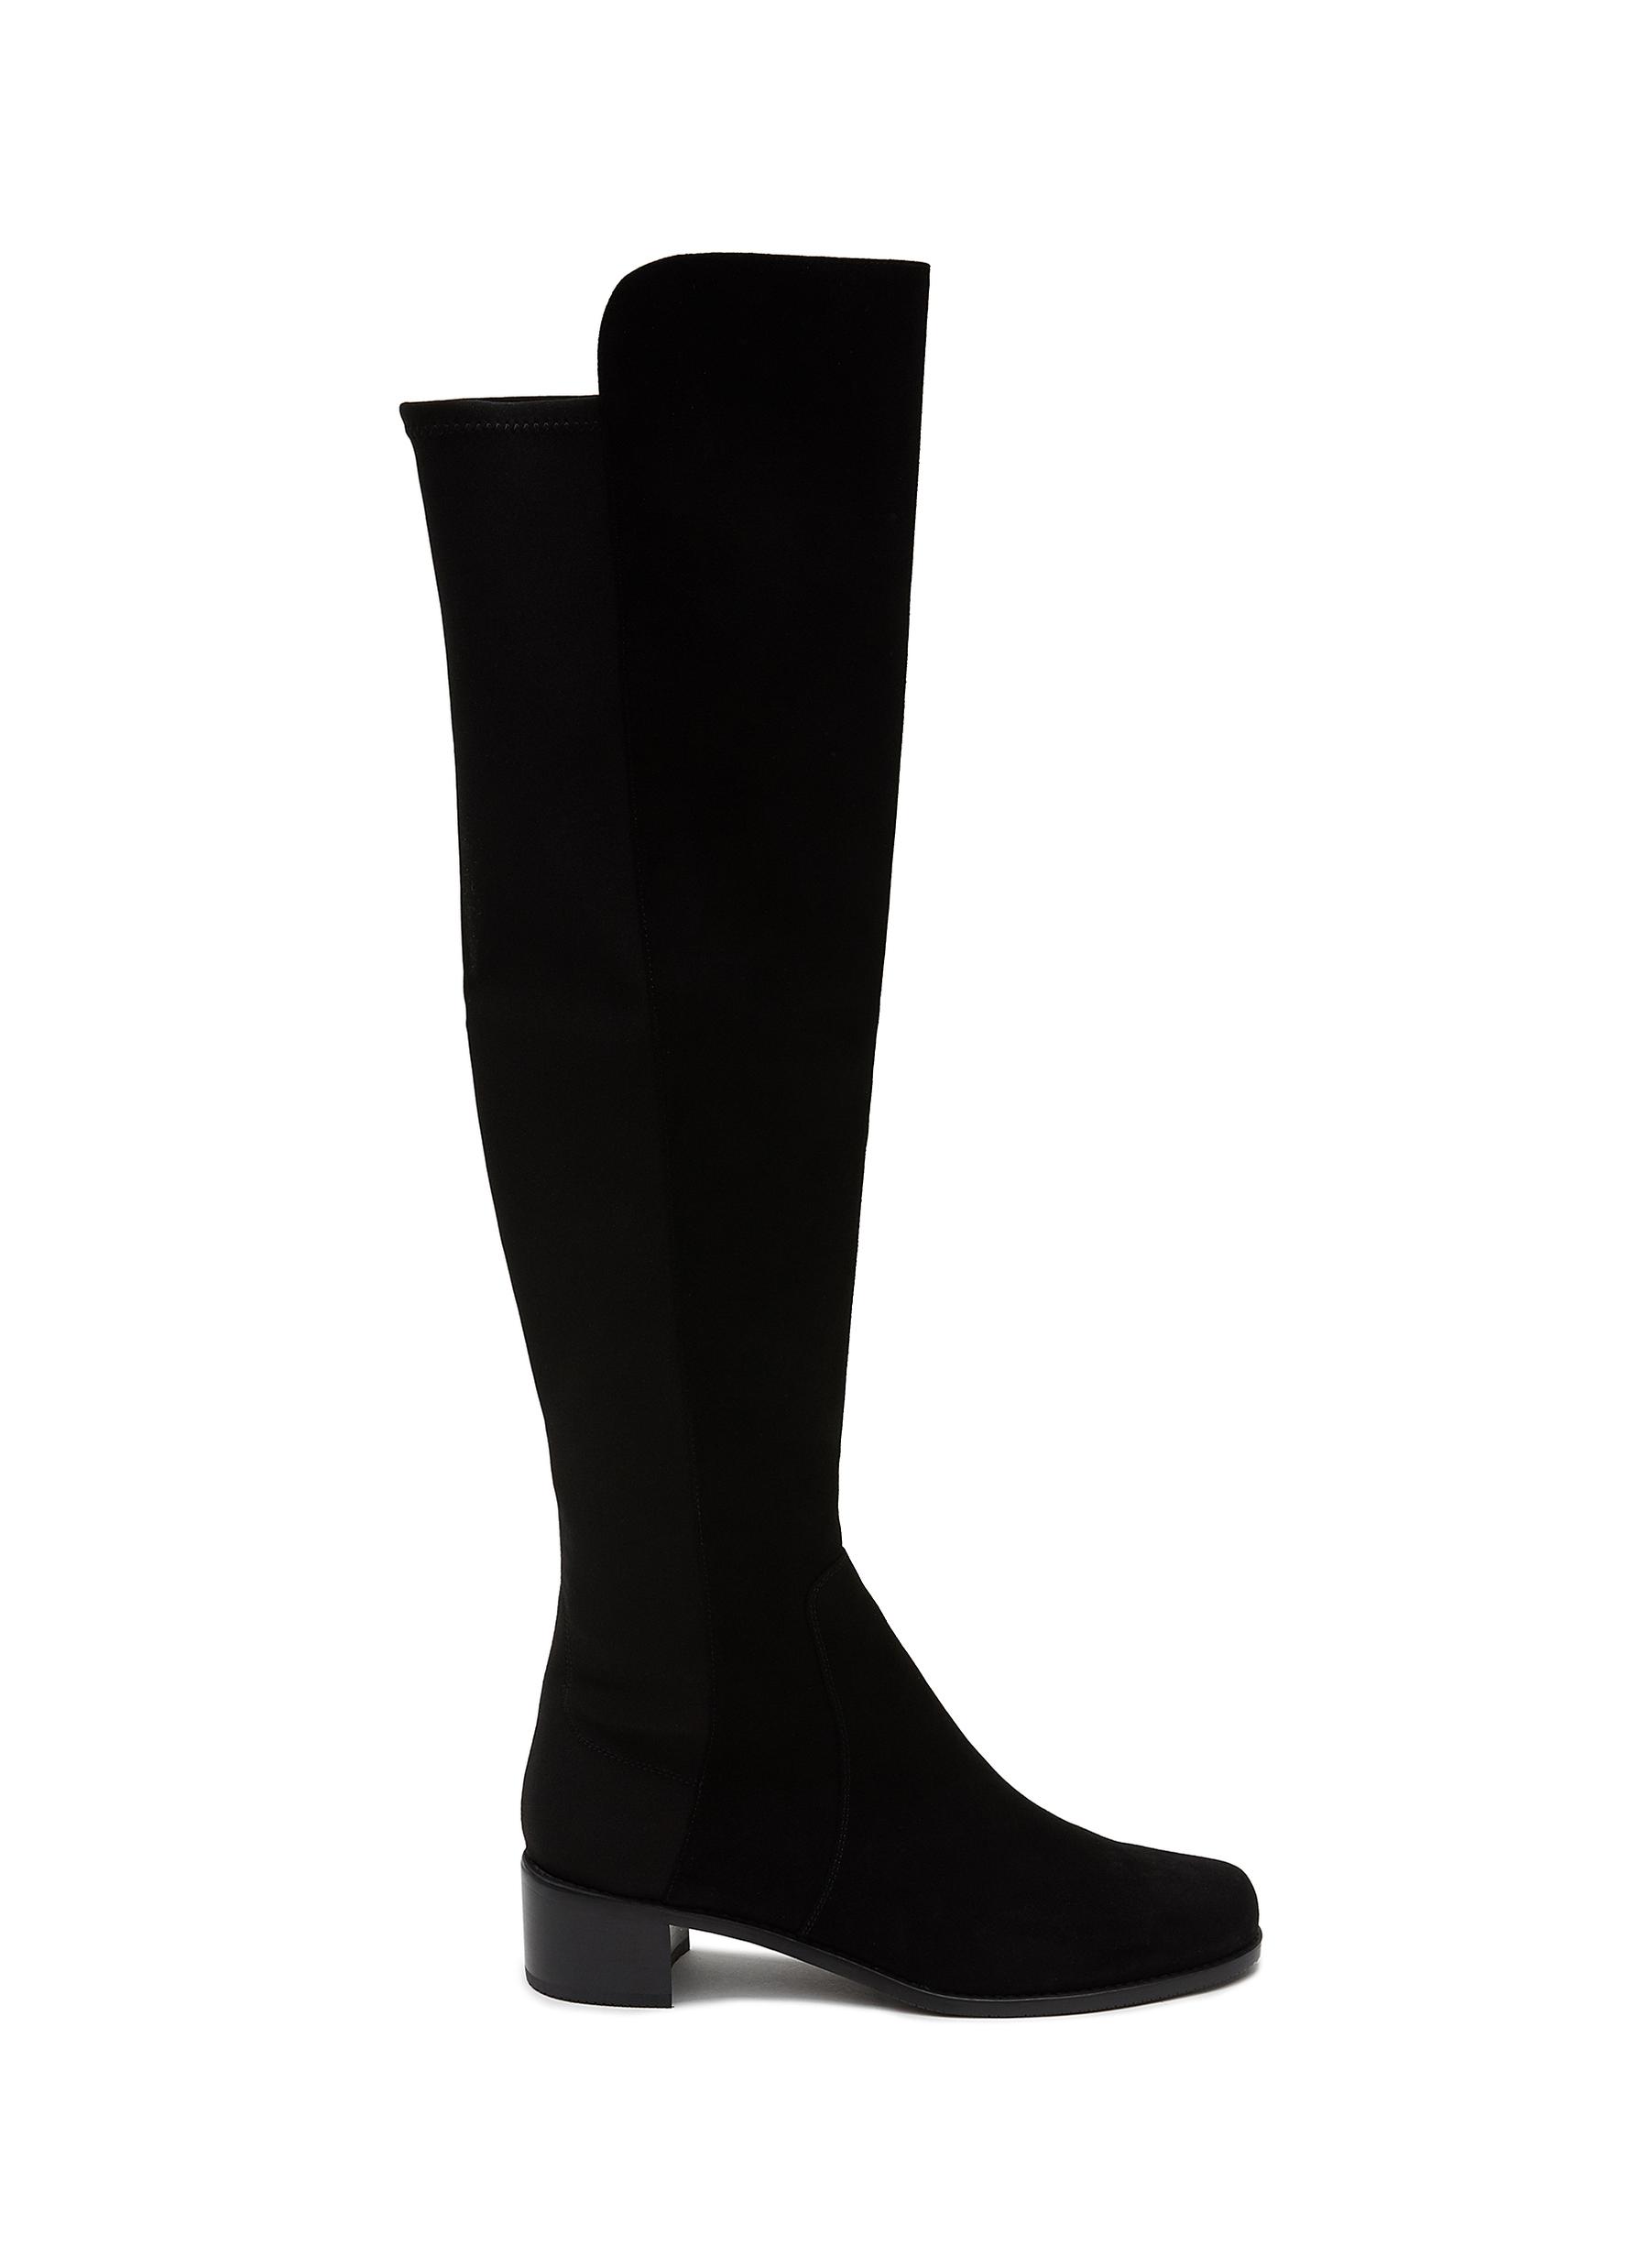 ‘RESERVE' STRETCH SUEDE KNEE HIGH BOOTS